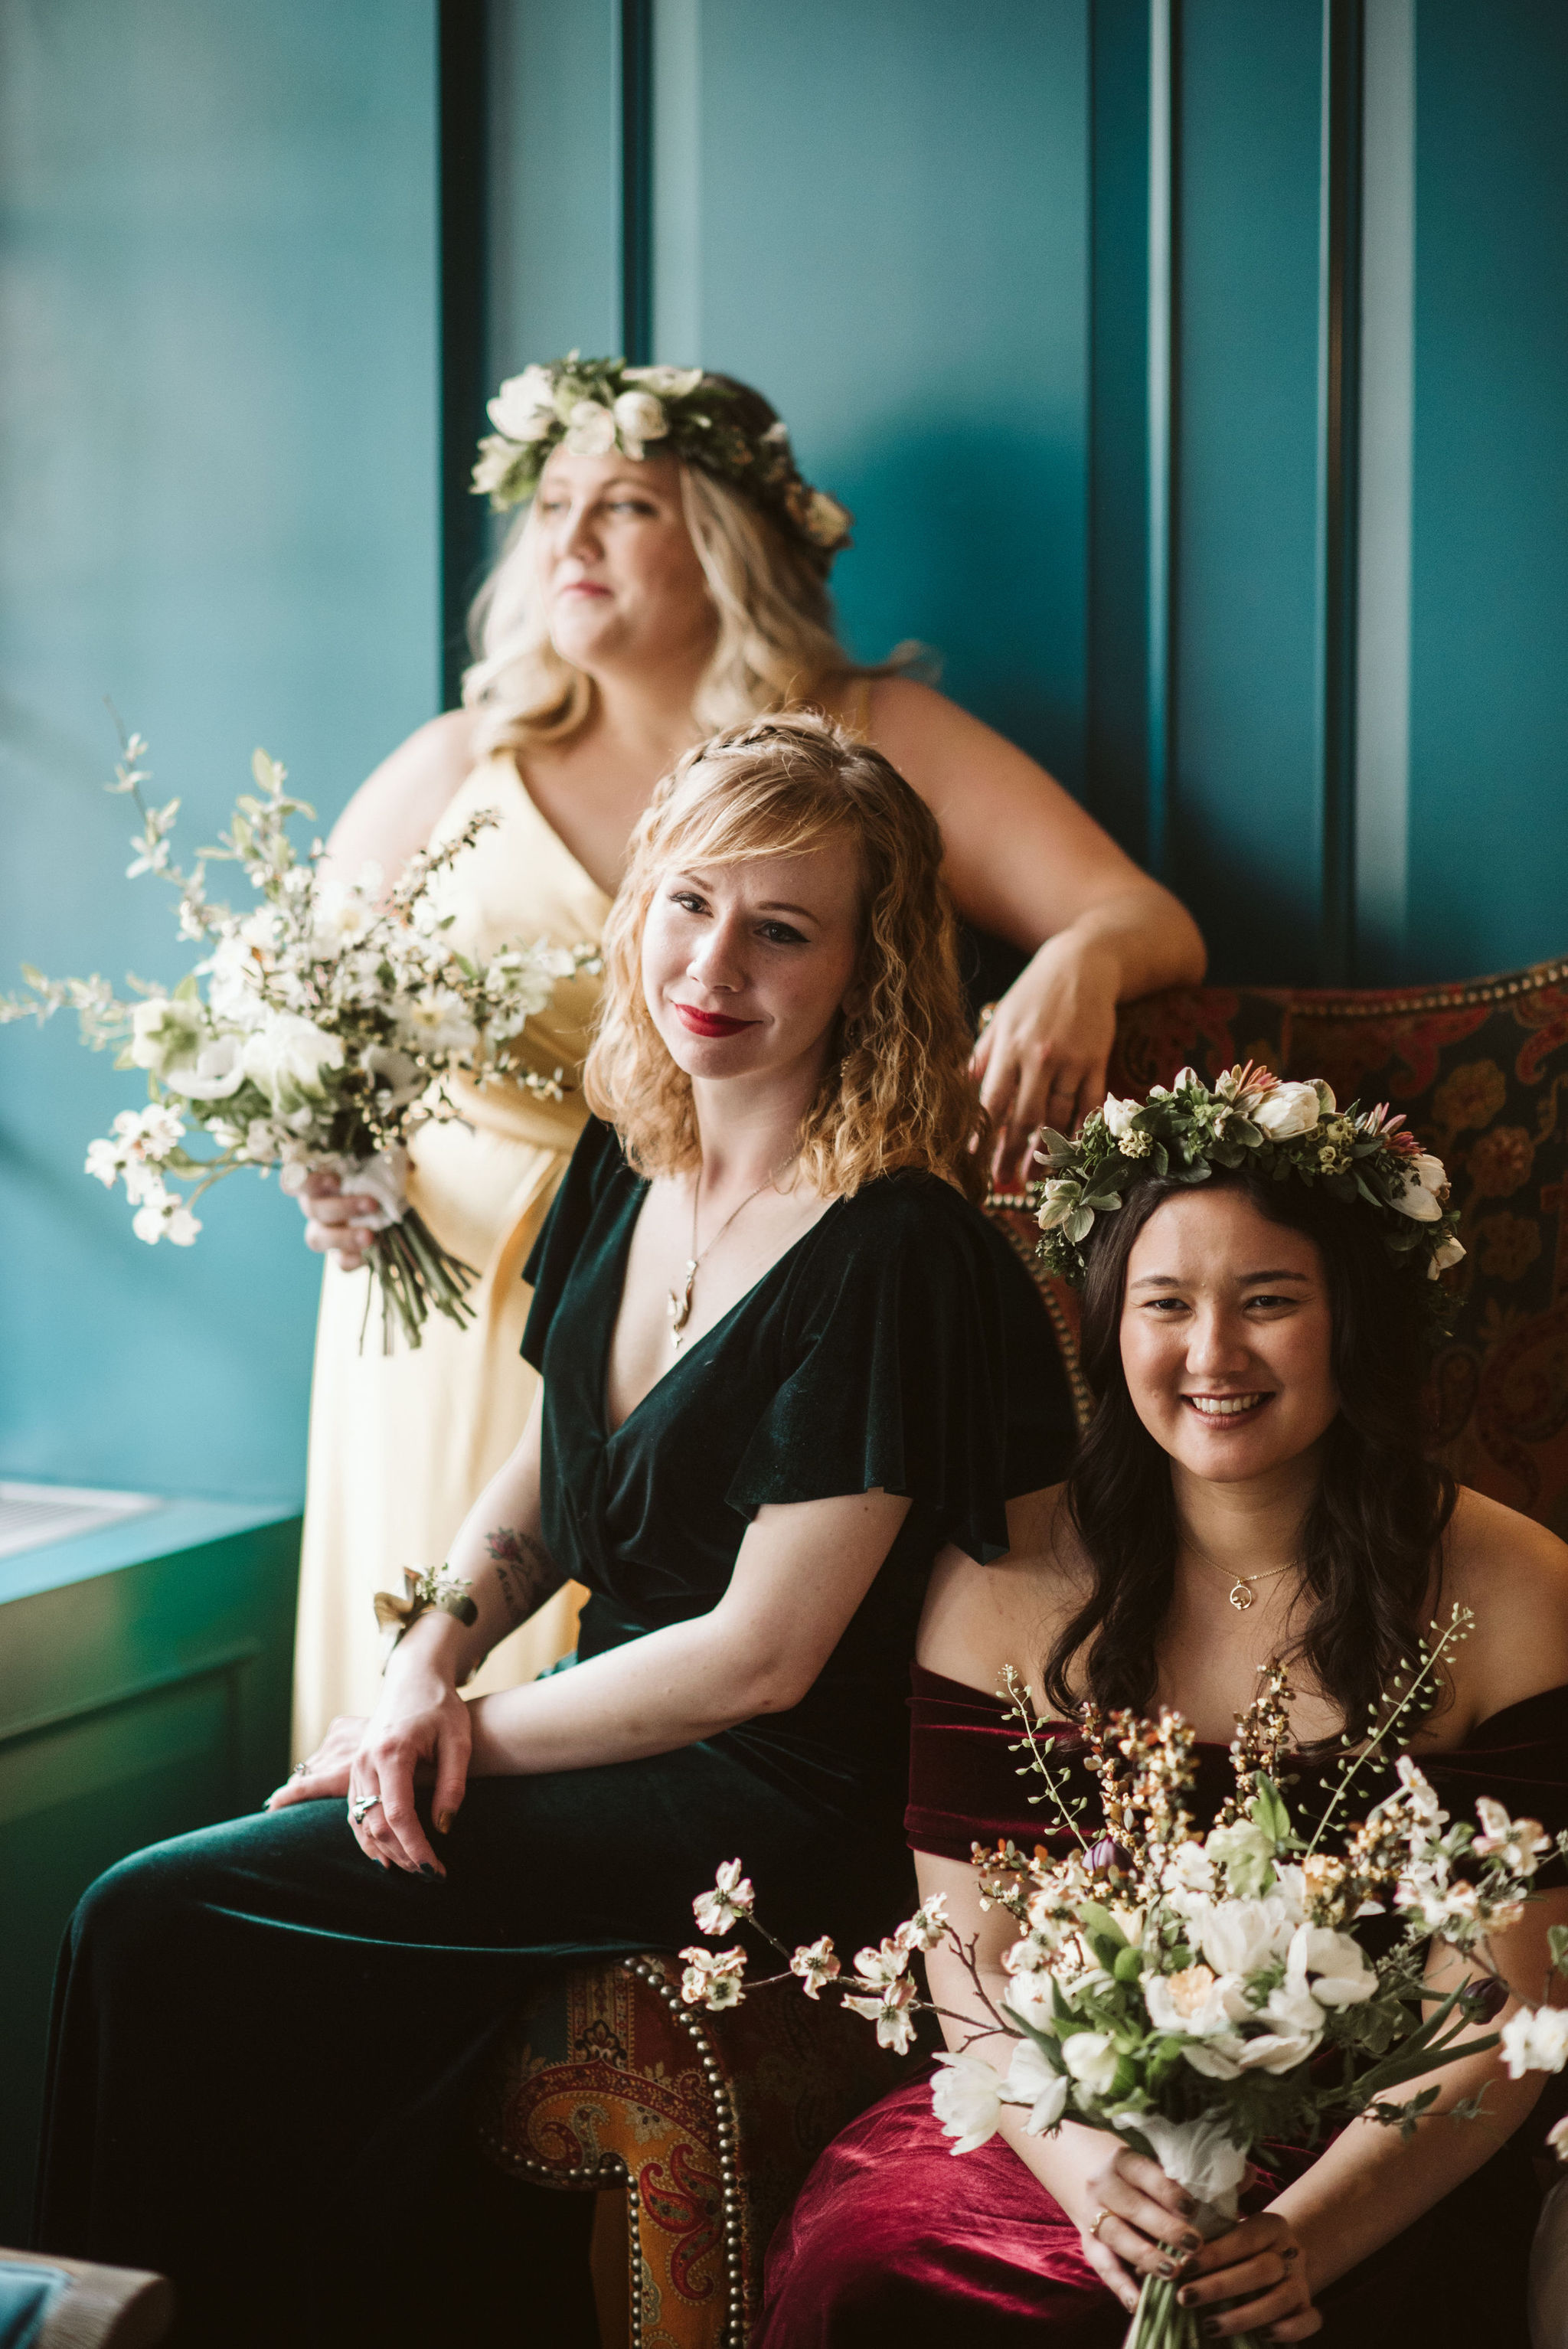  Washington DC, Baltimore Wedding Photographer, Alexandria, Old Town, Jewel Tone, Romantic, Modern, The Alexandrian Autograph Collection Hotel, Bridesmaids with velvet and chiffon dresses, Natural Floral Arrangements, Sungold Flower Co 